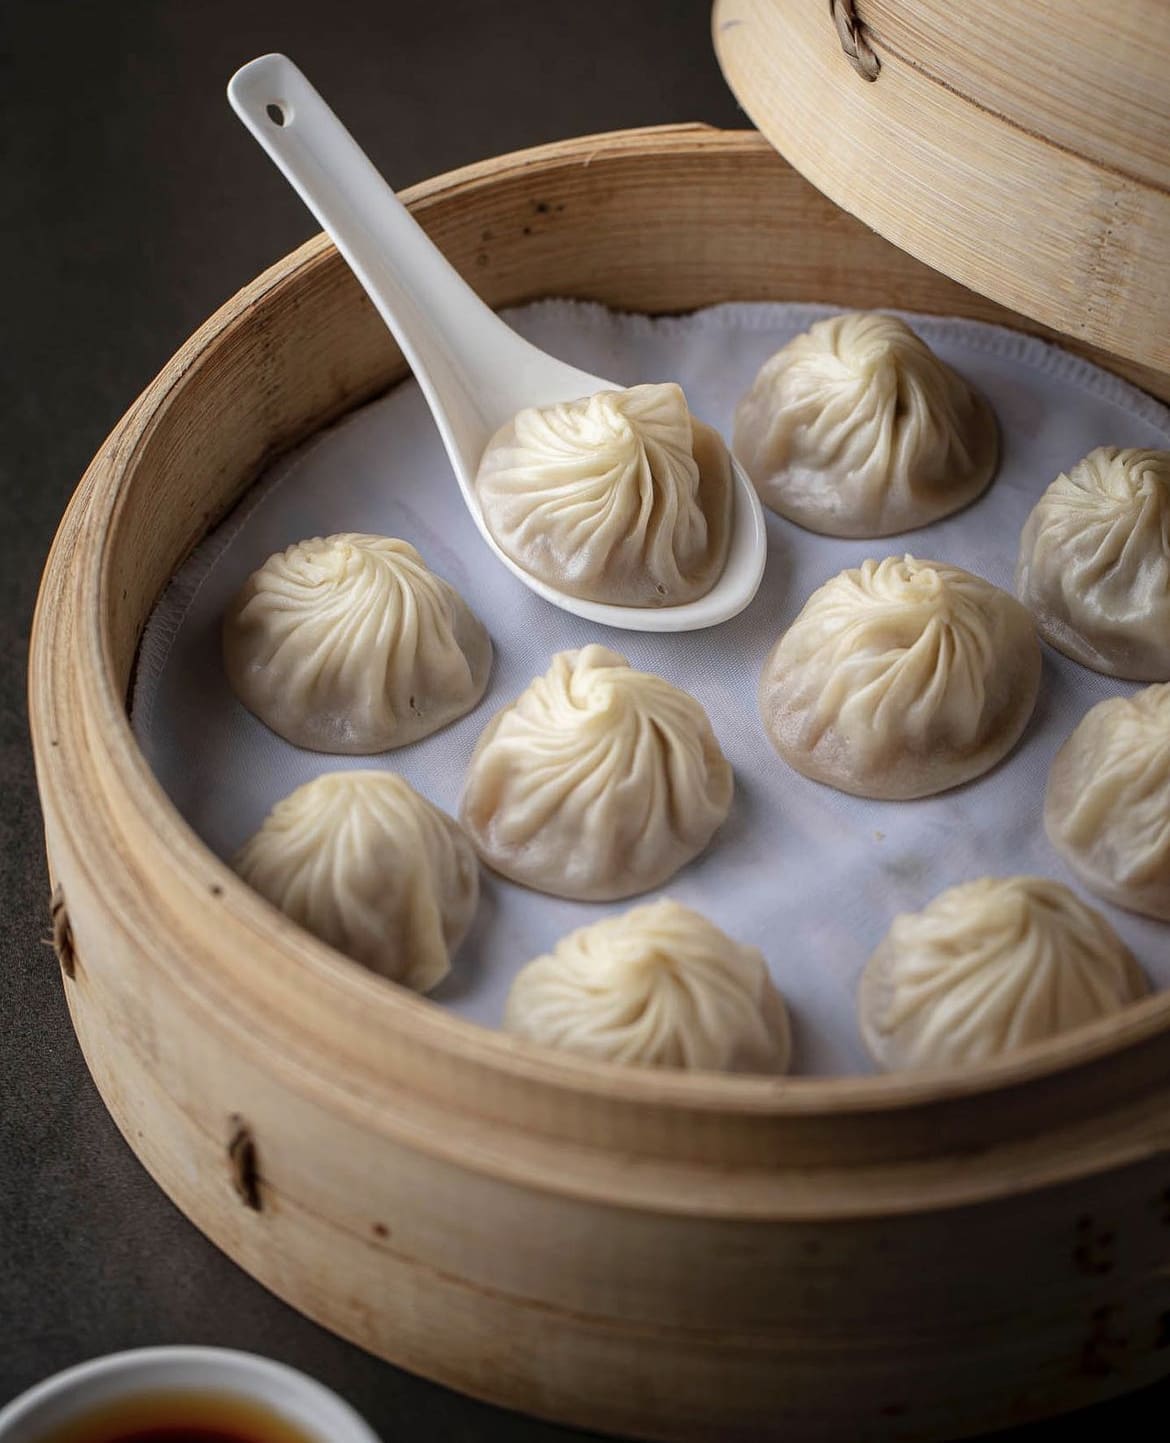 Xiaolongbao - 10 Traditional Chinese Foods To Try in China